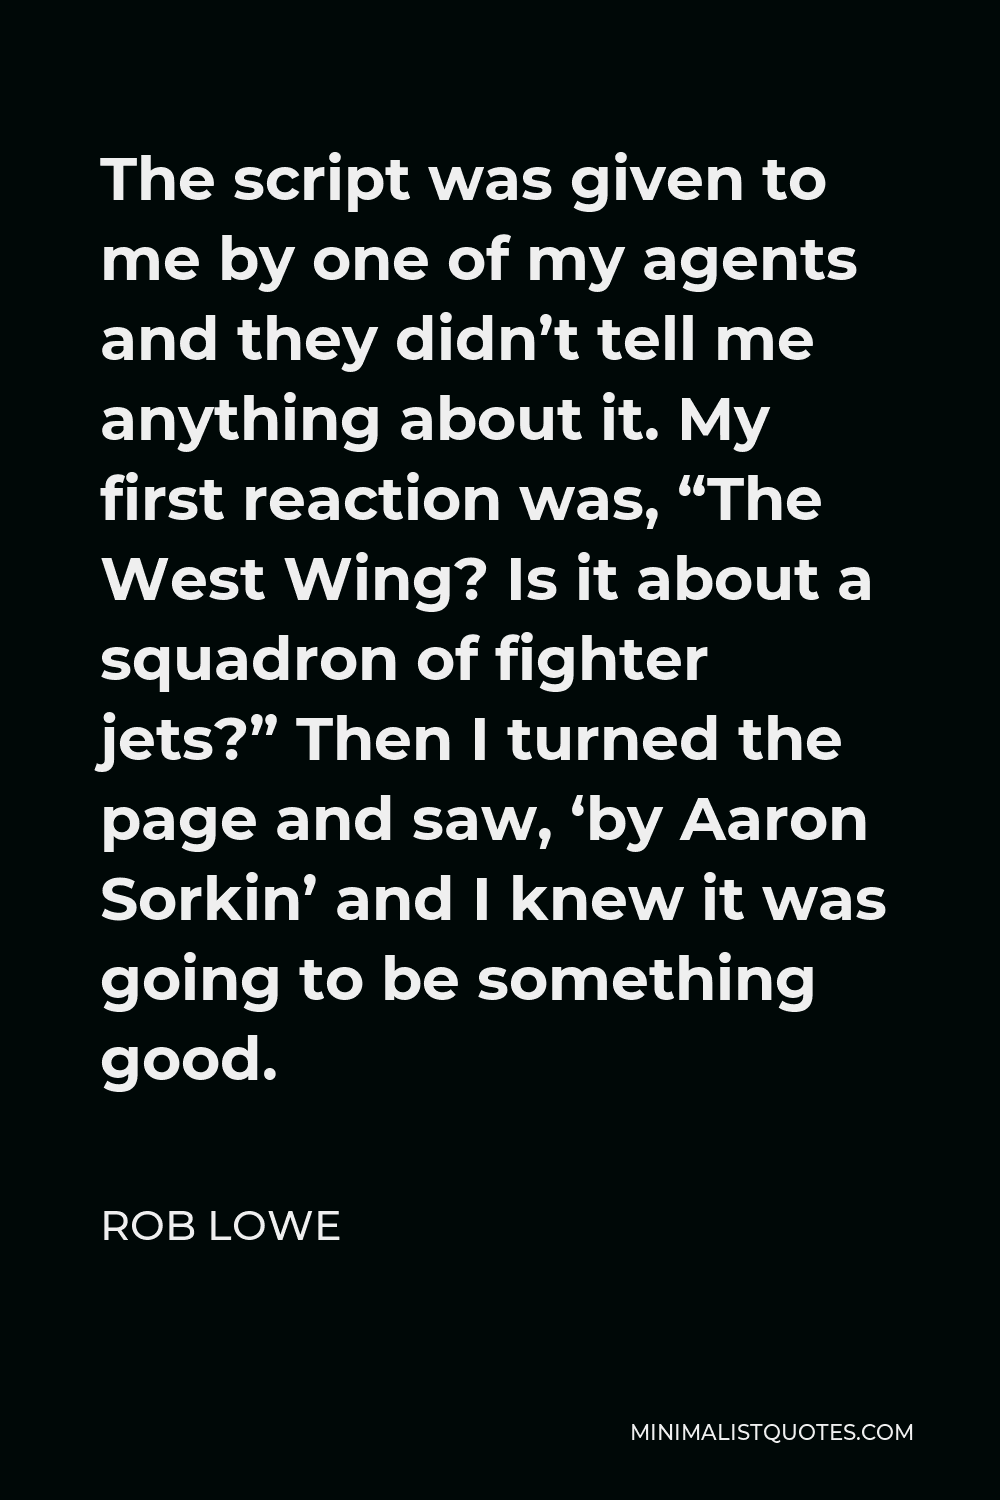 Rob Lowe Quote - The script was given to me by one of my agents and they didn’t tell me anything about it. My first reaction was, “The West Wing? Is it about a squadron of fighter jets?” Then I turned the page and saw, ‘by Aaron Sorkin’ and I knew it was going to be something good.